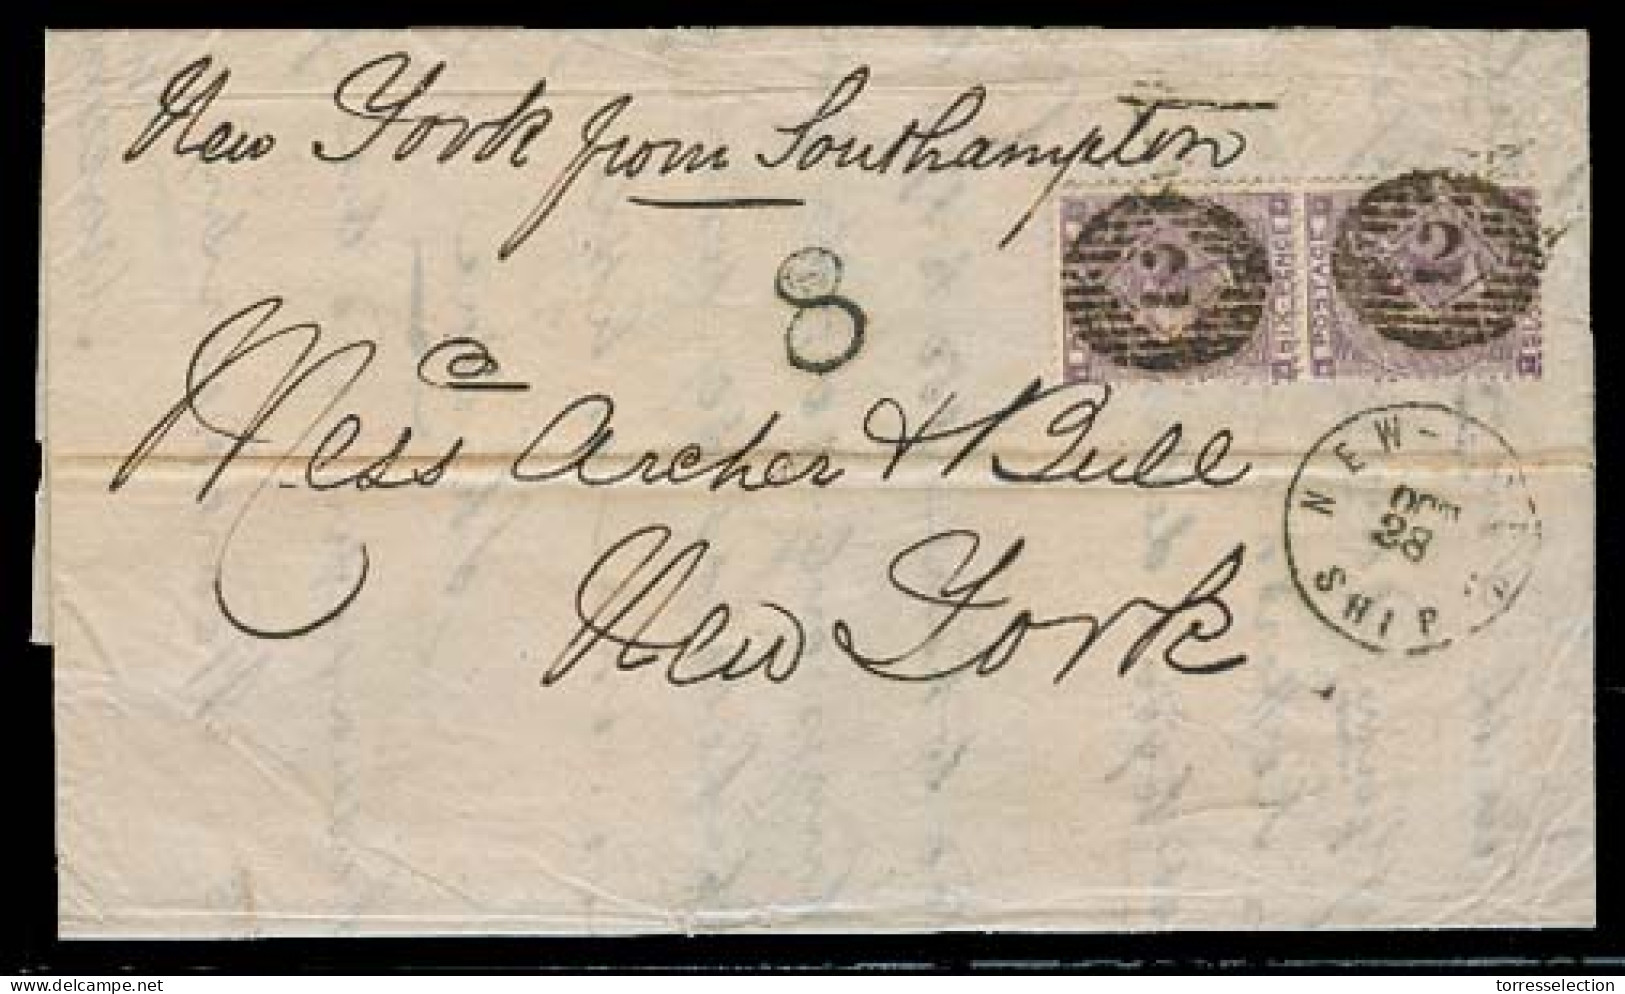 GREAT BRITAIN. 1863 (13 Oct). London - USA. EL Fkd 6d Vert Pair (SG 84). Lilac Vertical Pair On 1863 NY Ship Letter Very - ...-1840 Prephilately